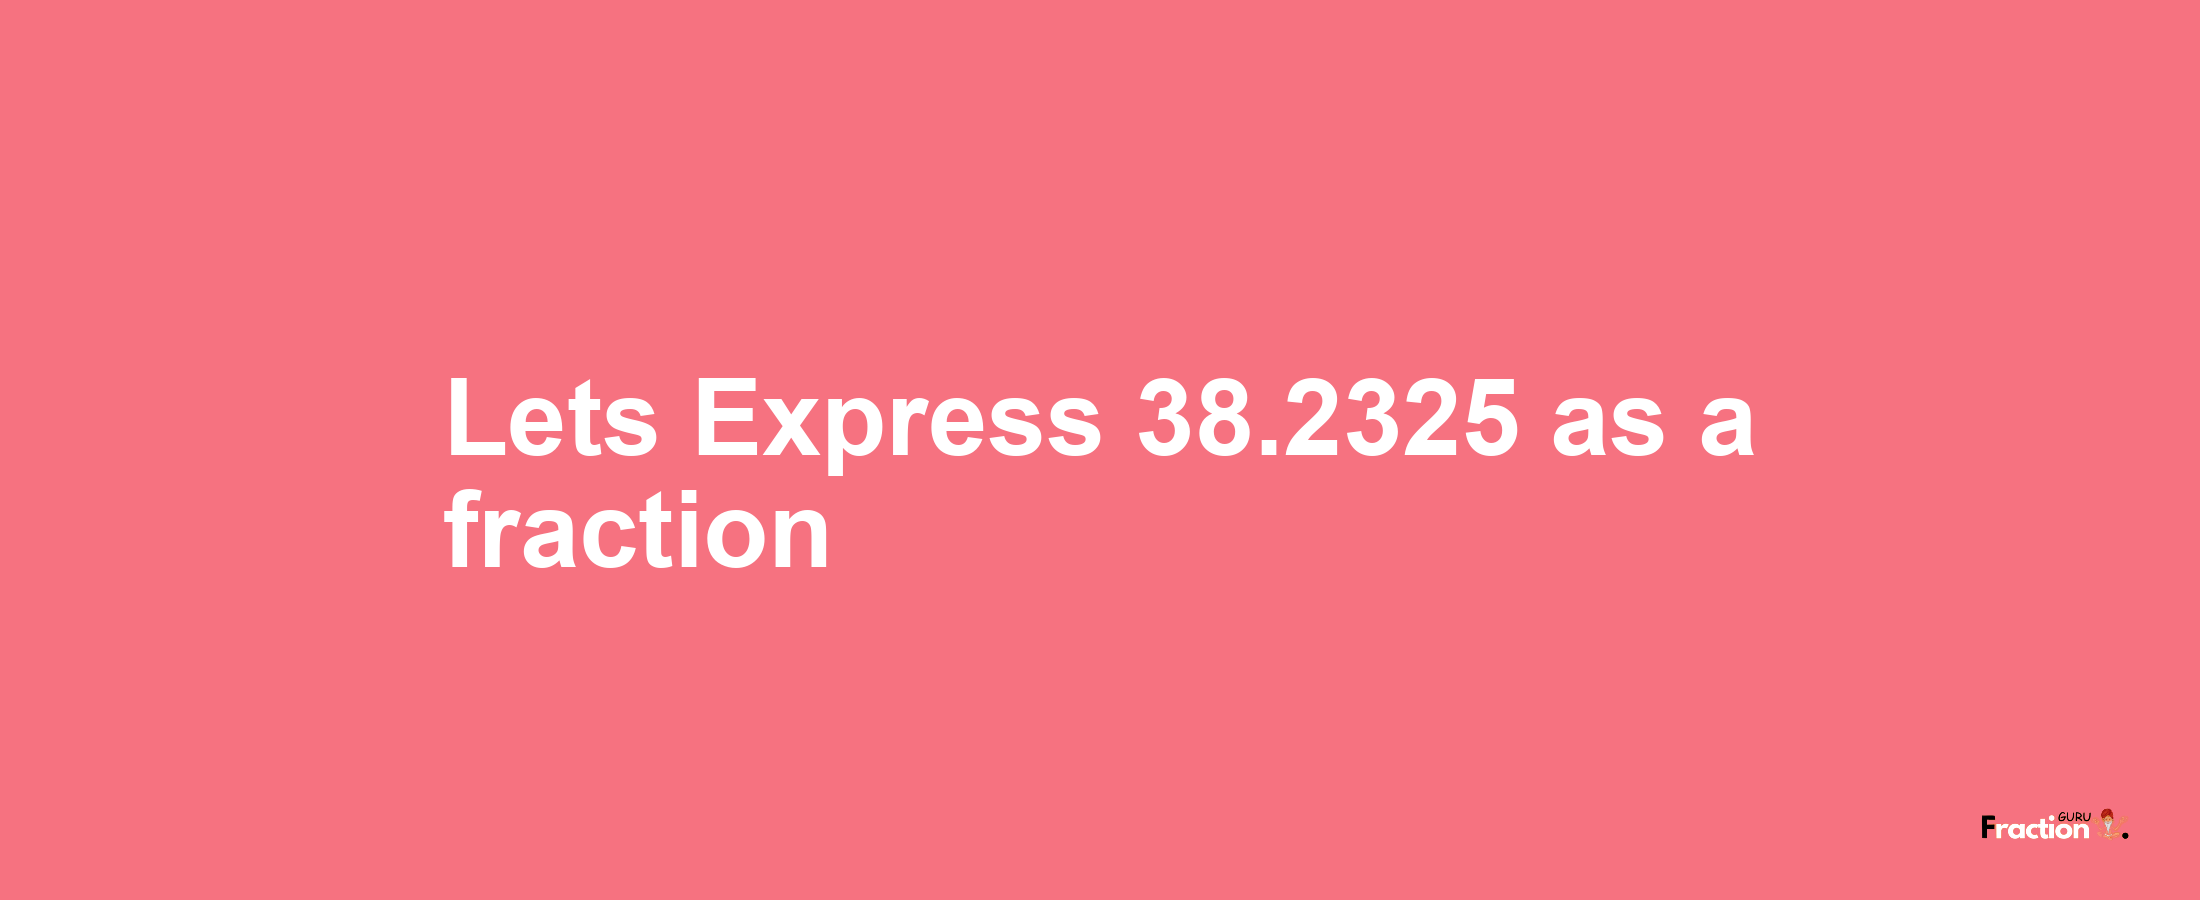 Lets Express 38.2325 as afraction